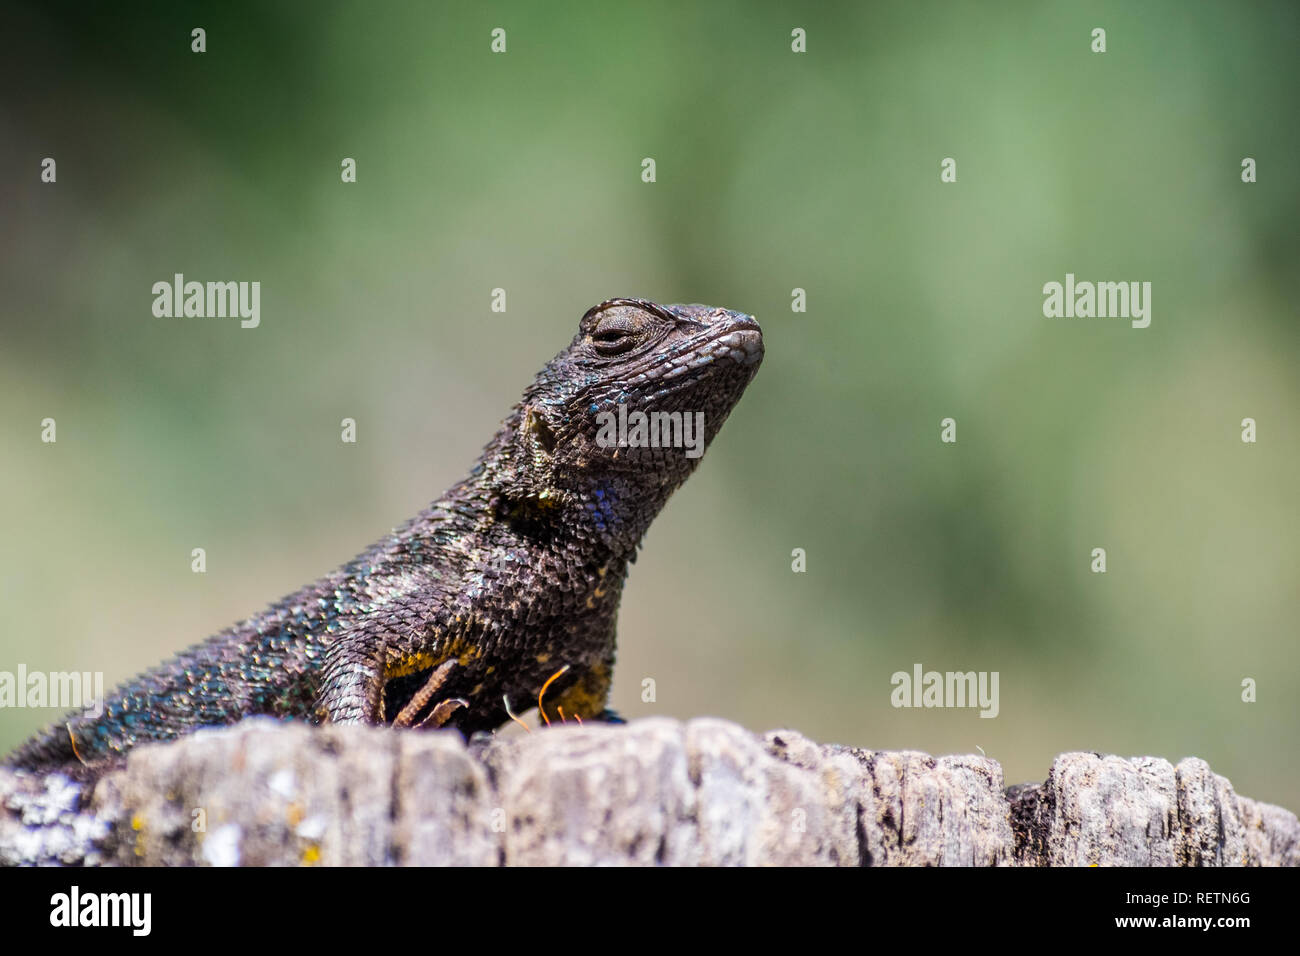 Western fence lizard (Sceloporus occidentalis) sitting on a wooden post on a sunny day; blue and green scales visible in the sunlight; south San Franc Stock Photo